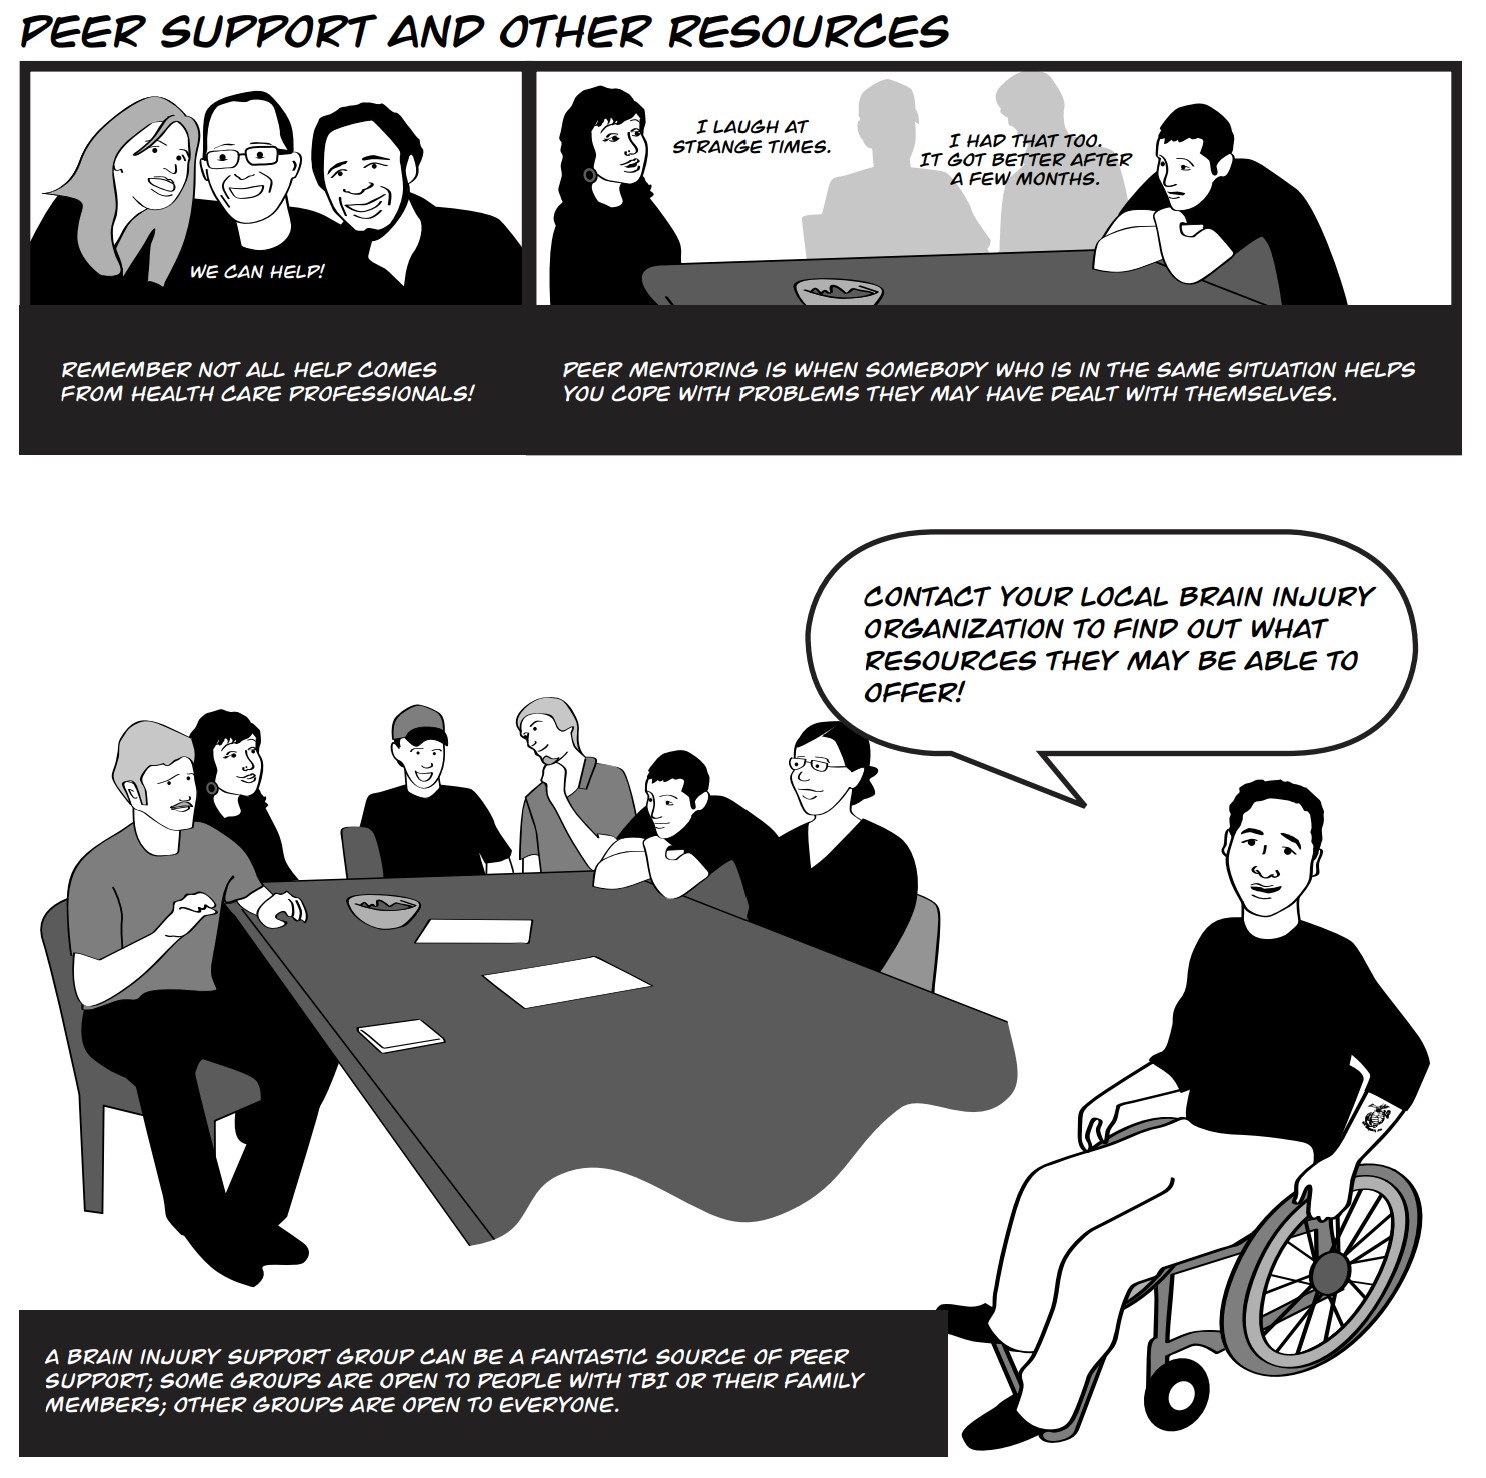 InfoComic: Emotional Changes After a Traumatic Brain Injury, Peer Support and Other Resources